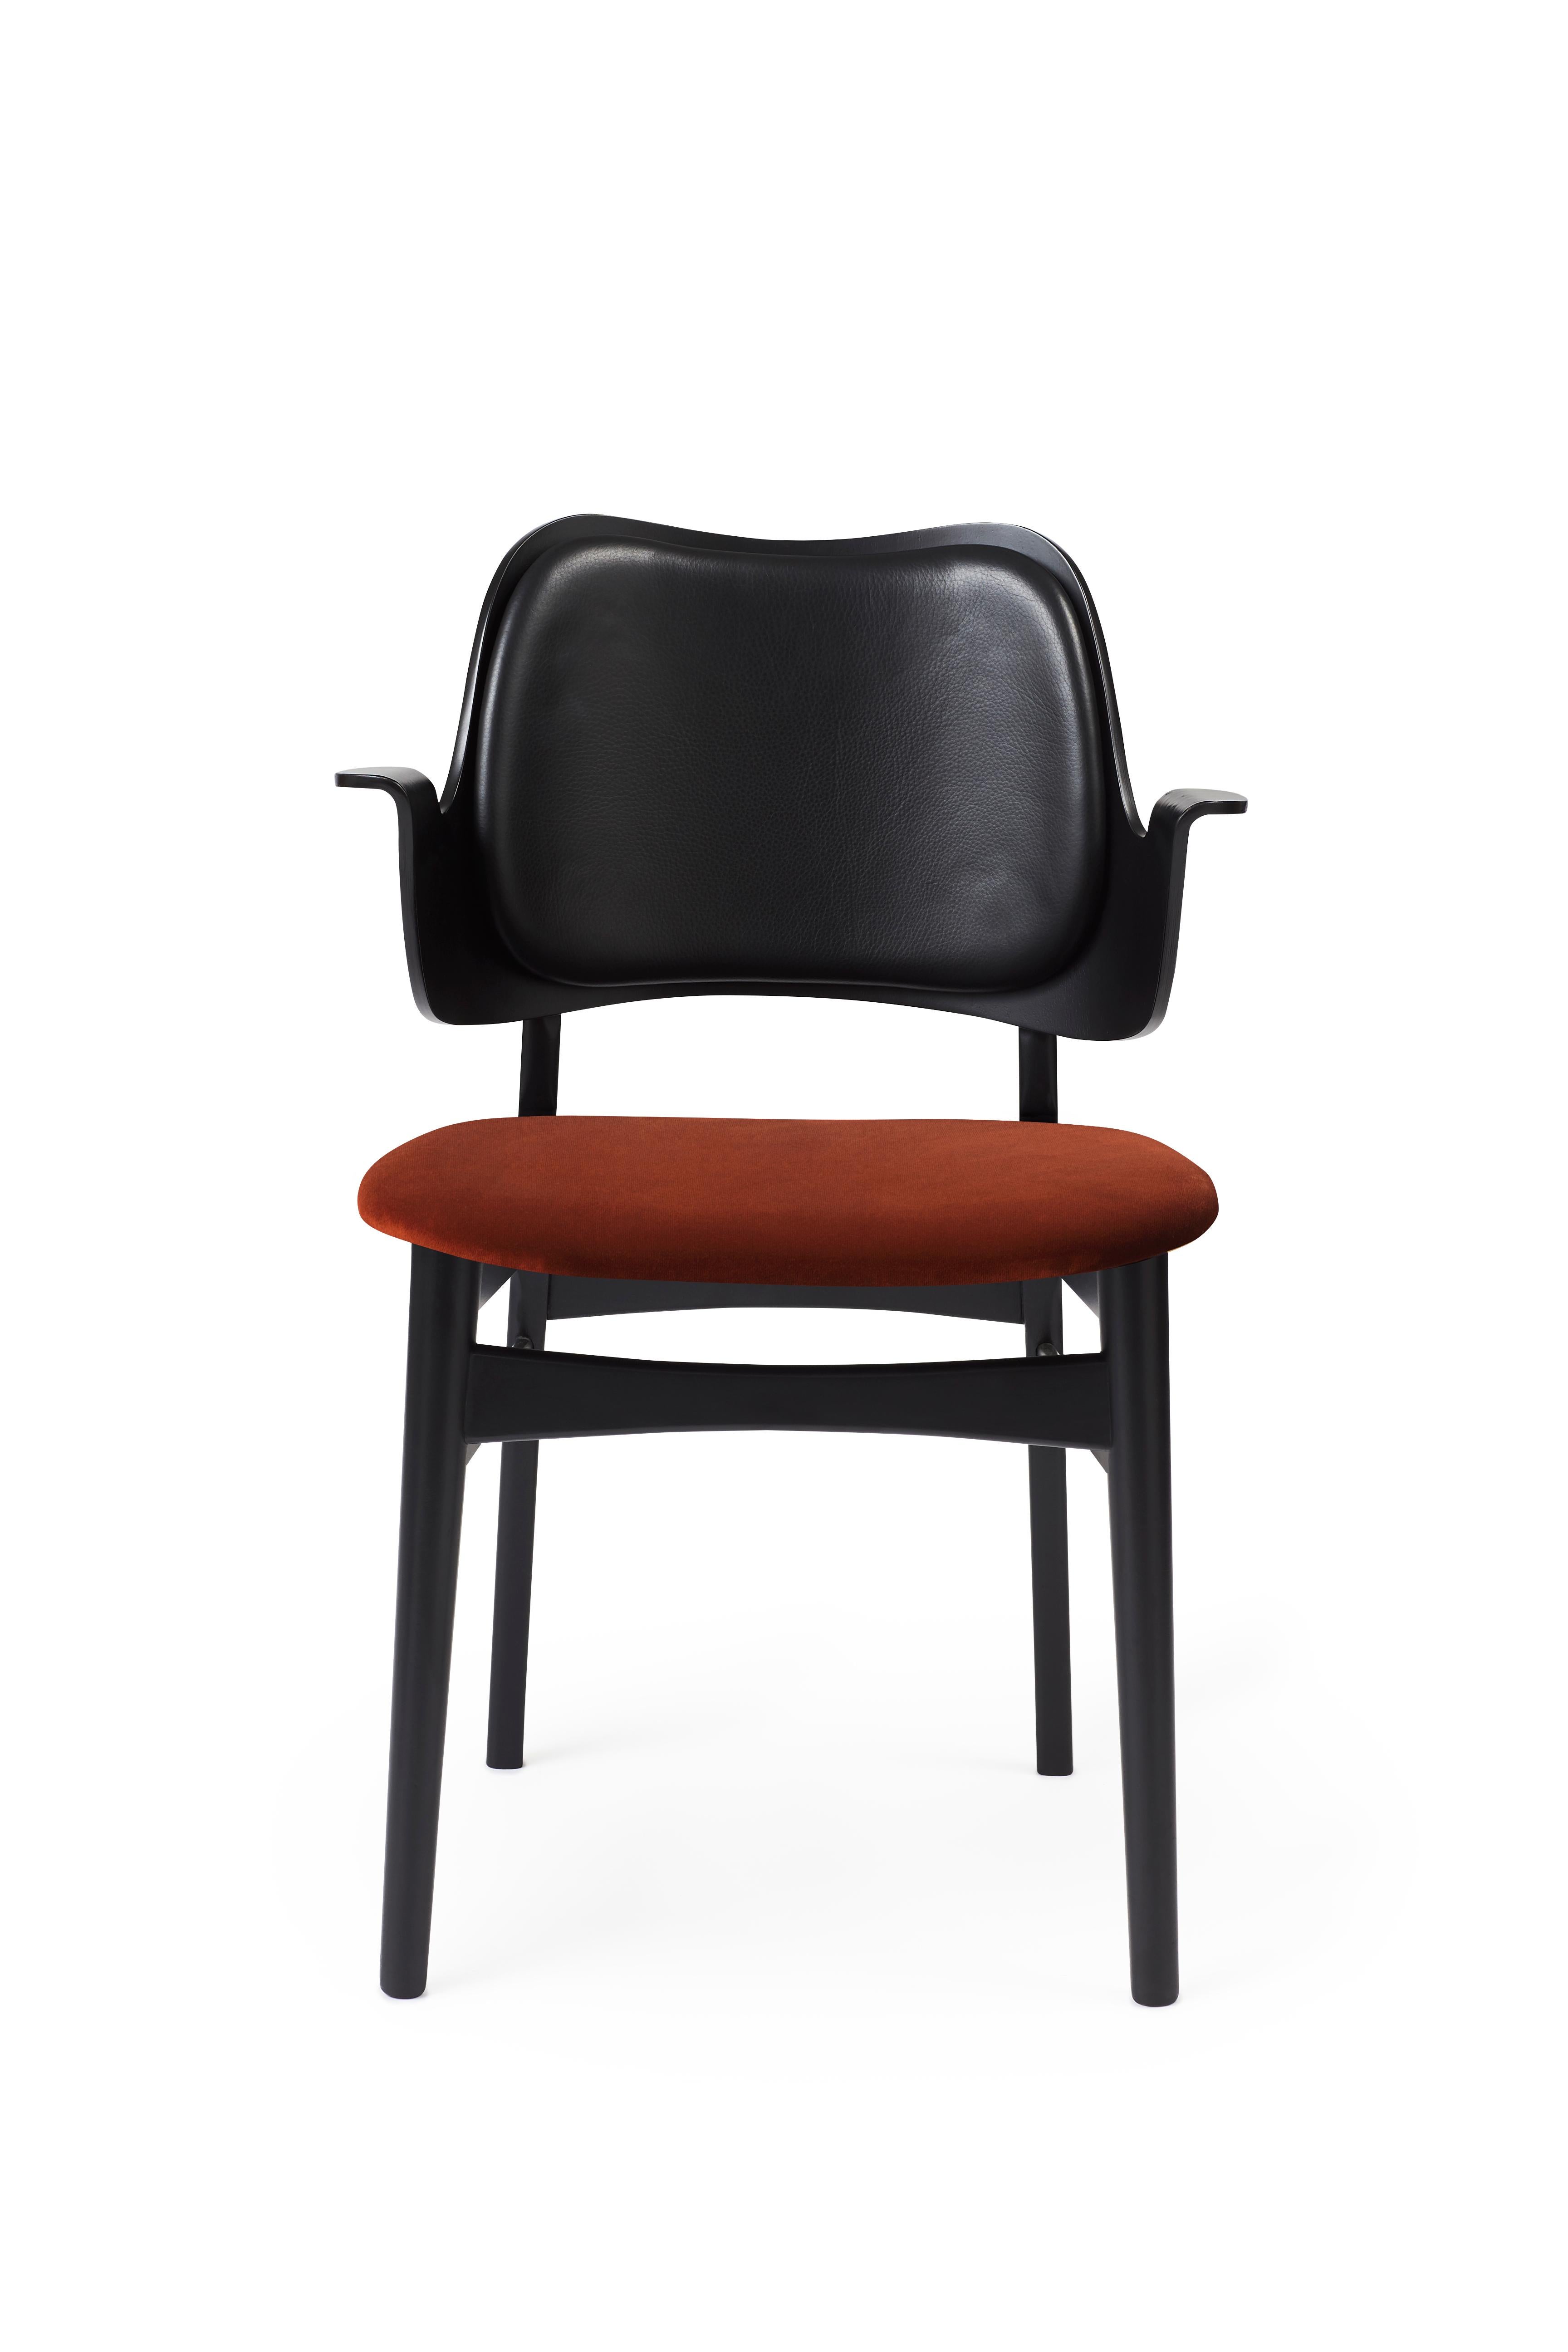 For Sale: Brown (Pres207, Ritz3701) Gesture Two-Tone Fully Upholstered Chair in Black, by Hans Olsen for Warm Nordic